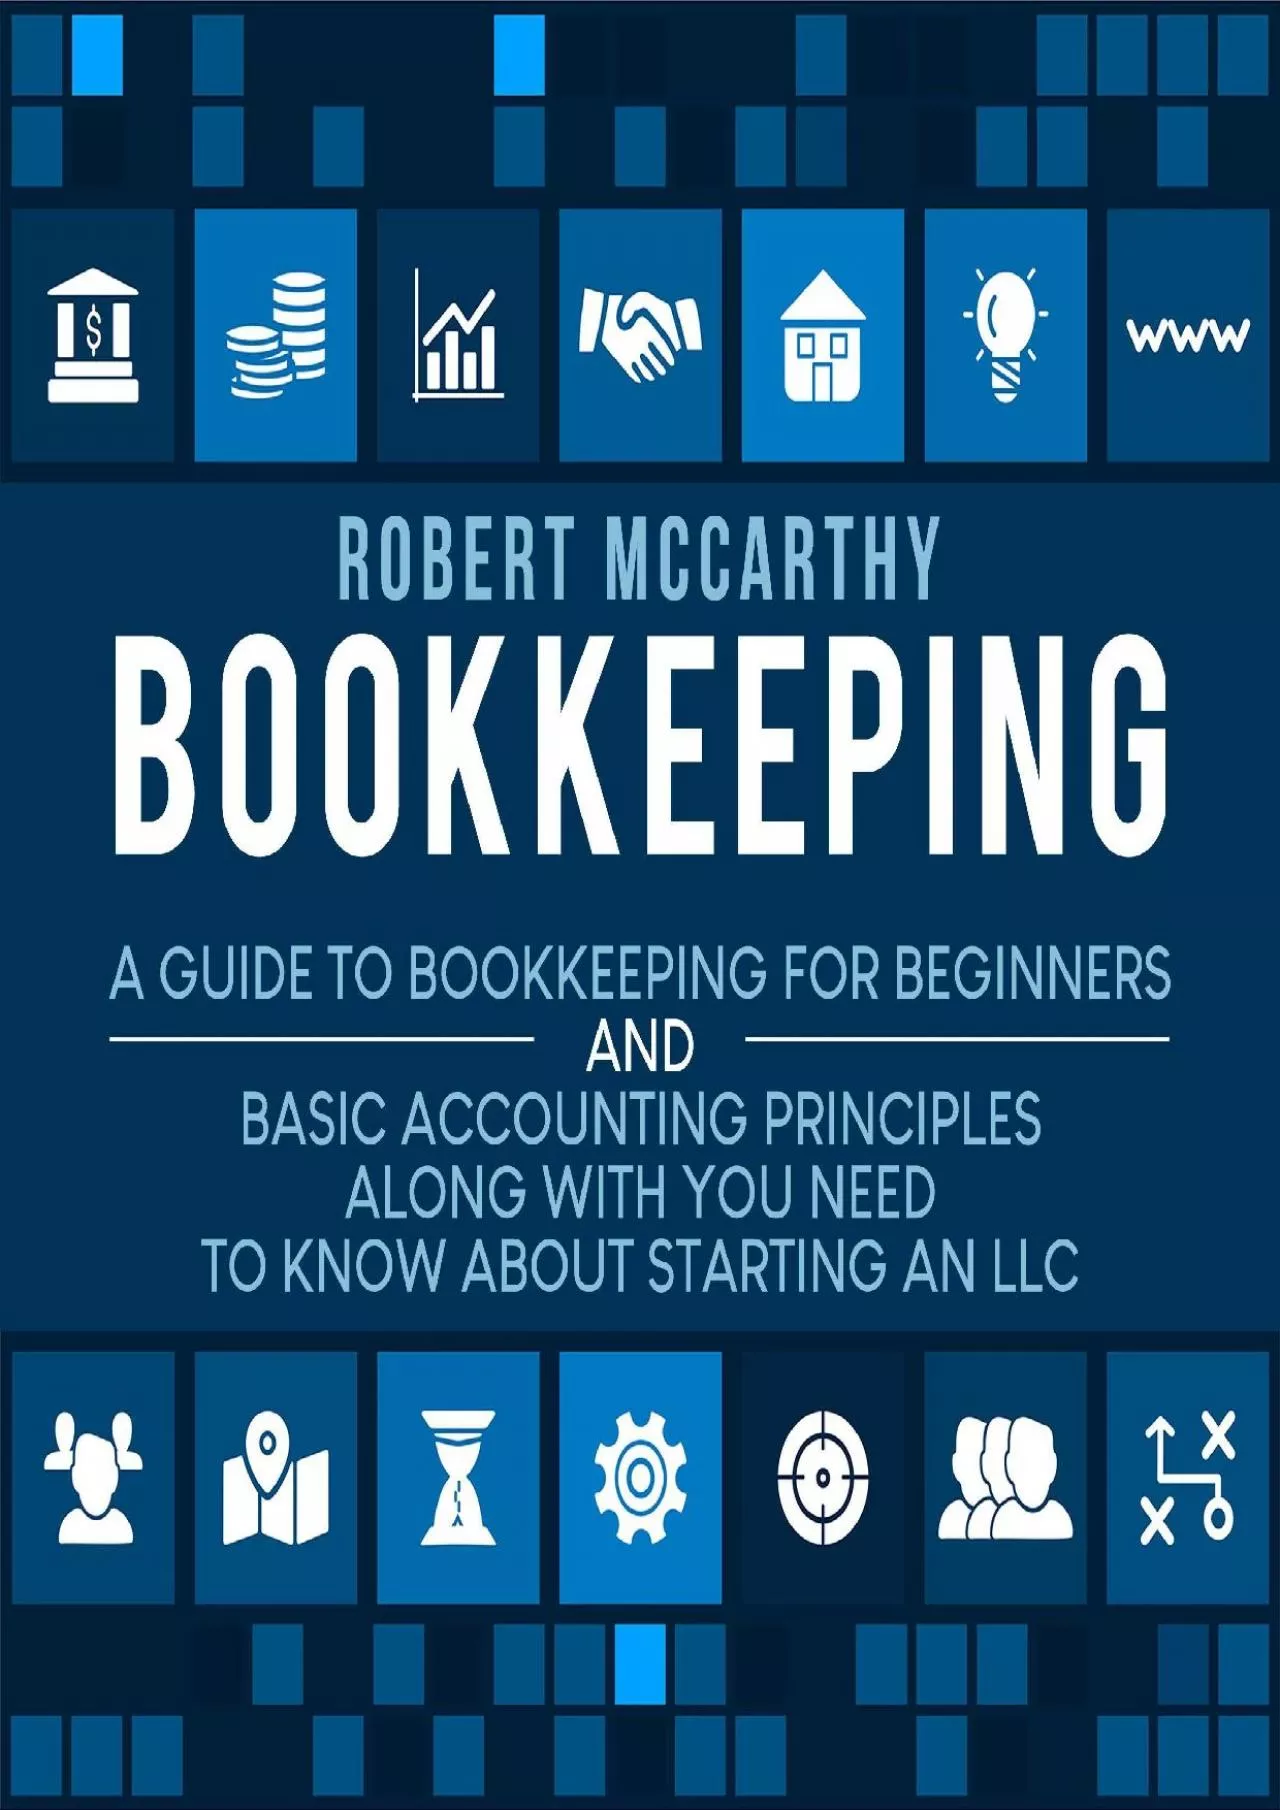 (BOOK)-Bookkeeping: A Guide to Bookkeeping for Beginners and Basic Accounting Principles